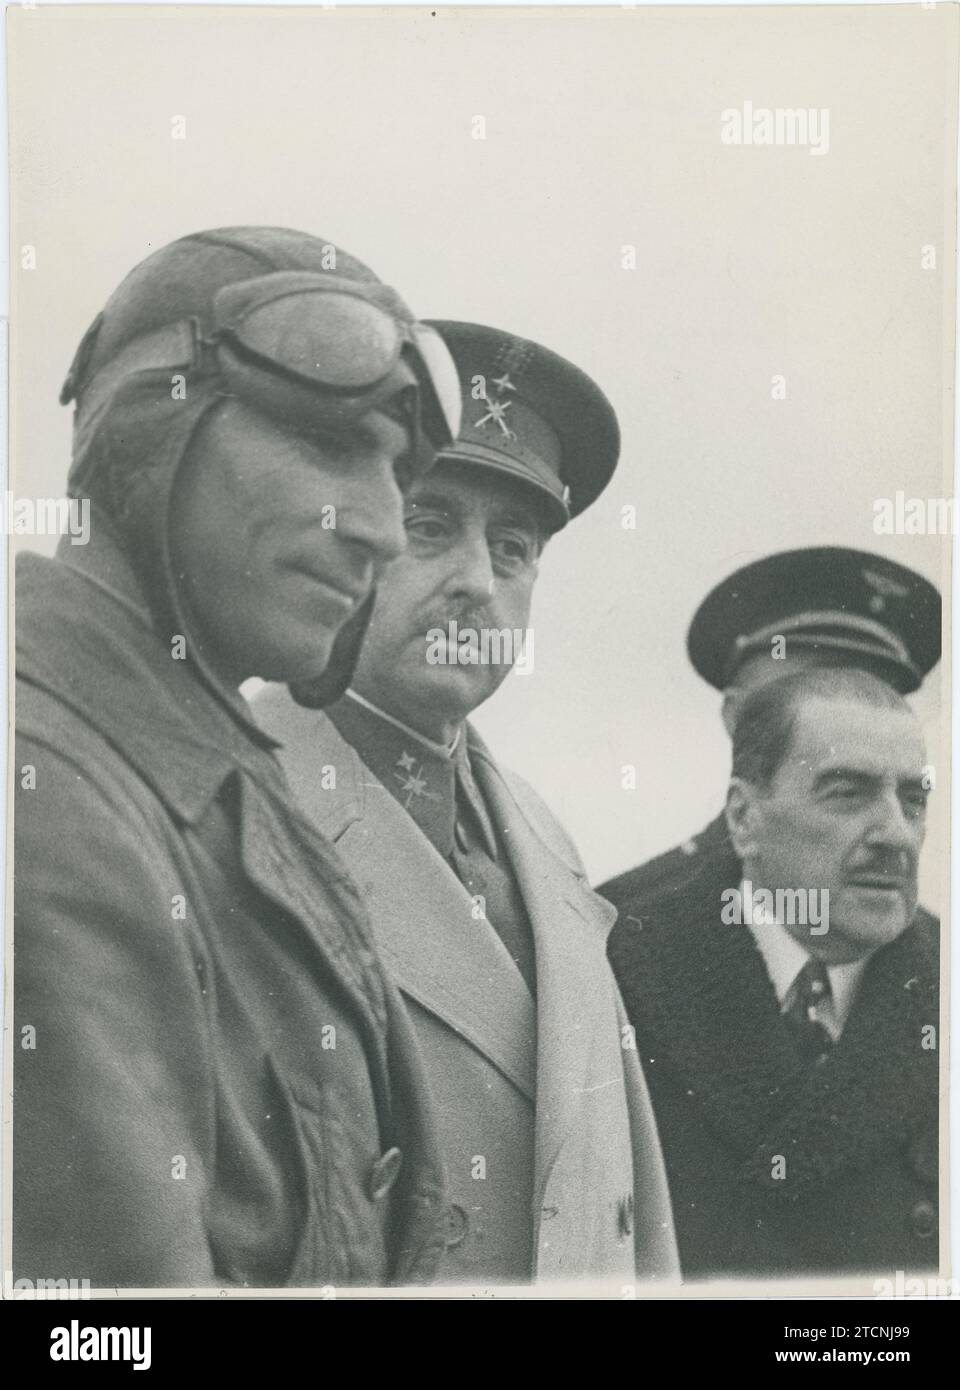 Madrid, 02/21/1936. Cuatro Vientos Aerodrome. Arrival in Madrid from Seville of the pilot Antonio Menéndez Peláez, who made the flight between Camaguey (Cuba) and Seville, and later the journey between Seville and Madrid. In the image, he witnesses the parade of the forces that honor him upon his arrival, accompanied by the Chief of General Aeronautics, Nuñez de Prado, representing the Government, and the Charge d'Affaires of Cuba, Mr. Pichardo. Credit: Album / Archivo ABC / José Díaz Casariego Stock Photo